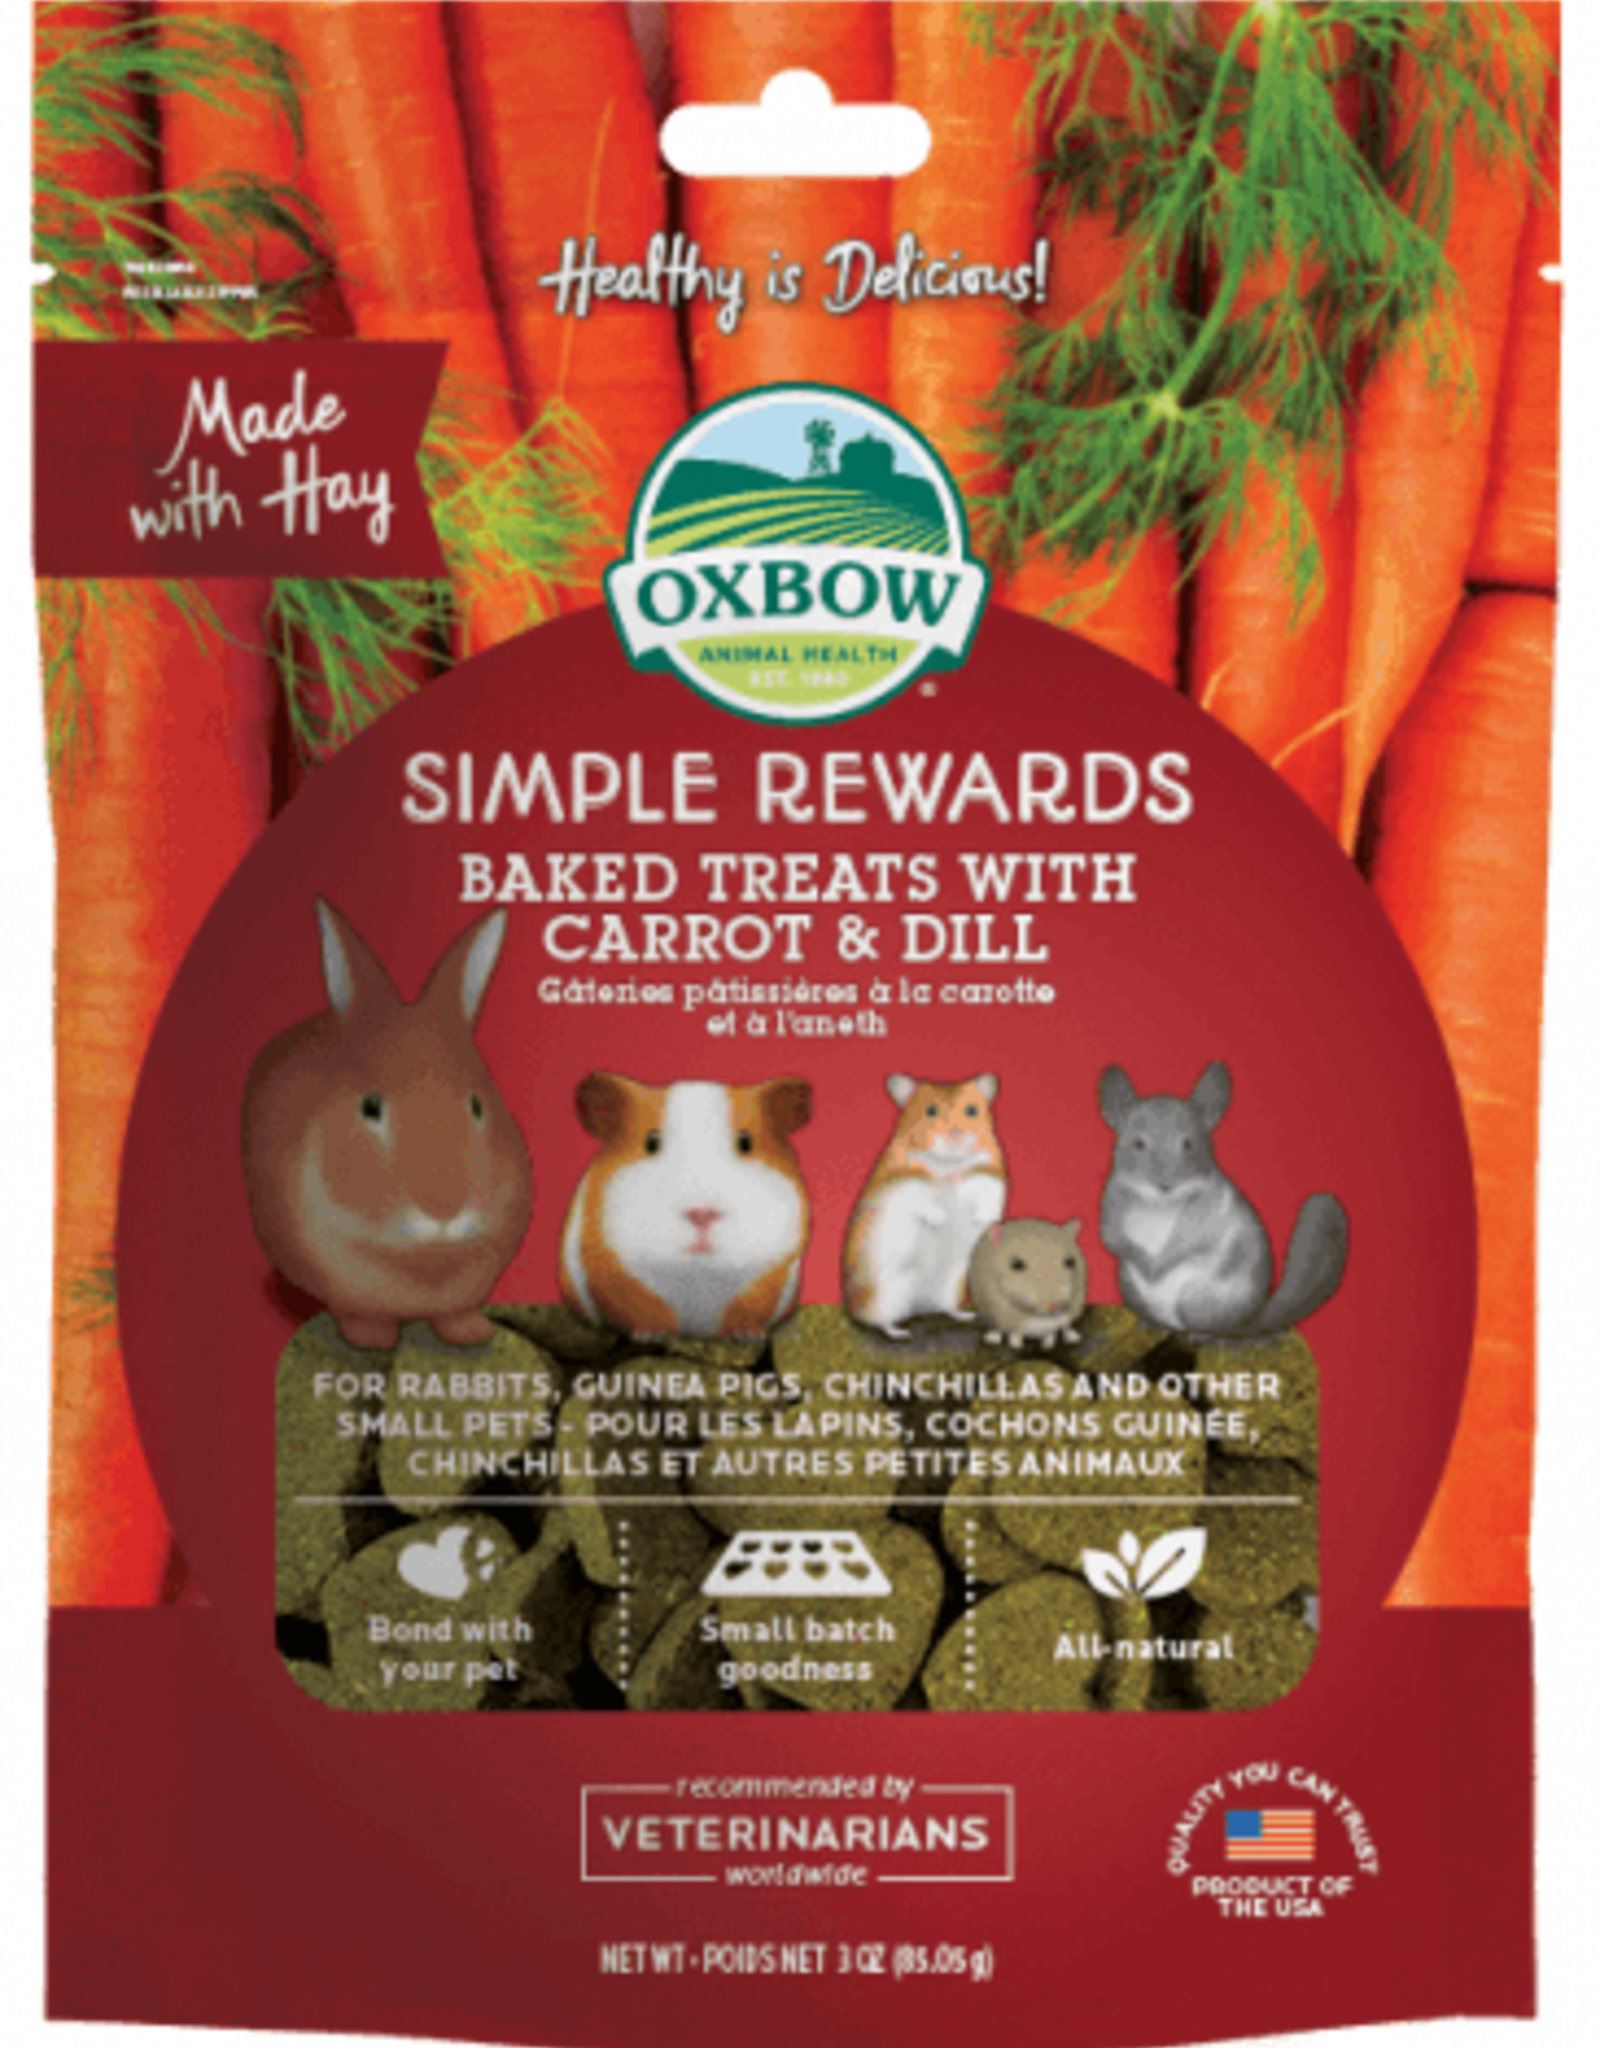 OXBOW PET PRODUCTS OXBOW SIMPLE REWARD CARROT & DILL 2OZ